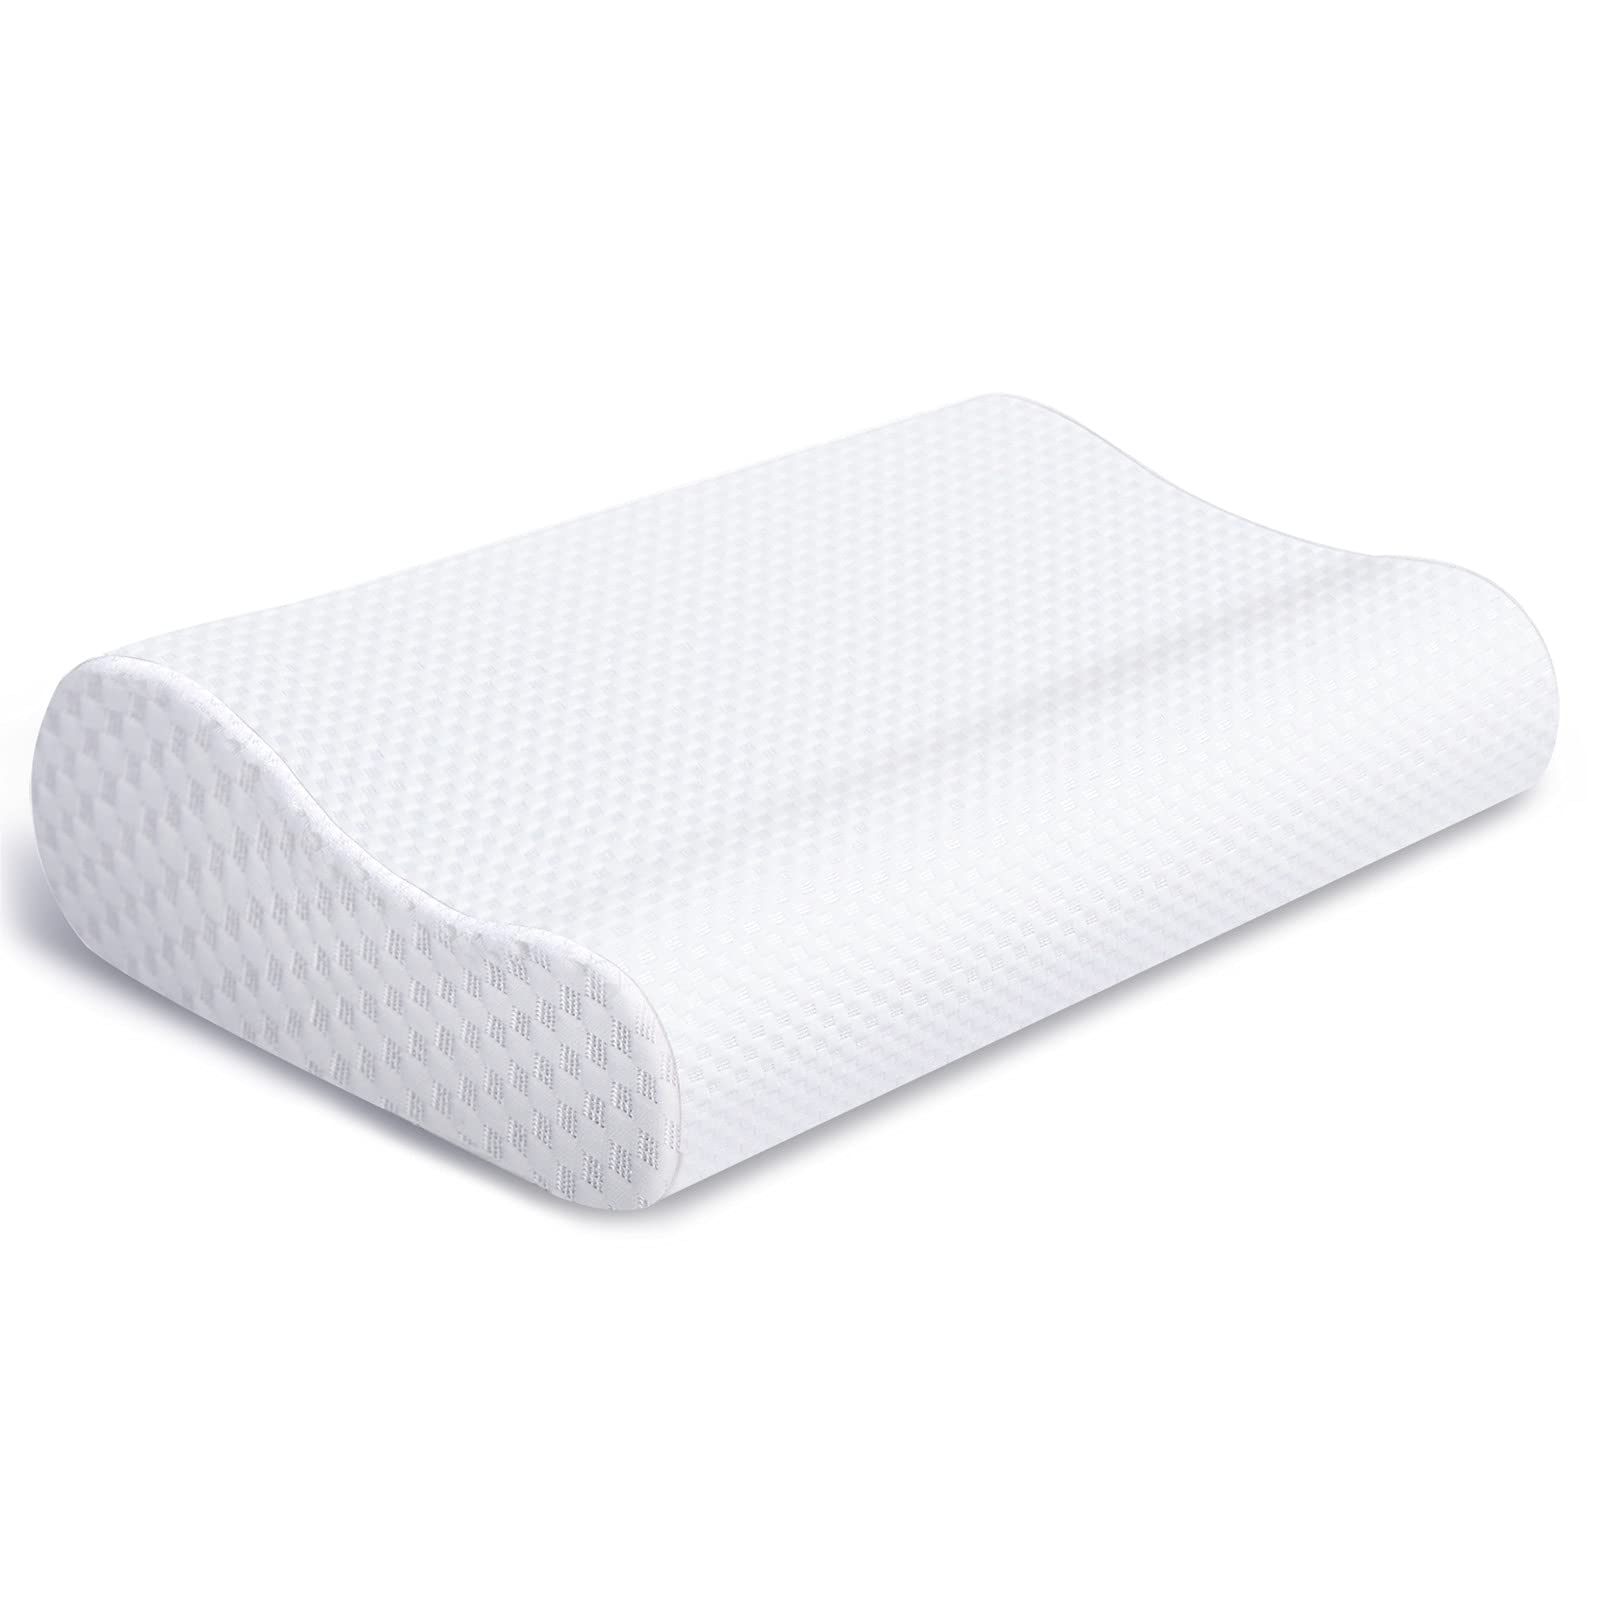 Costway Memory Foam Sleep Pillow Orthopedic Contour Cervical Neck Support  White